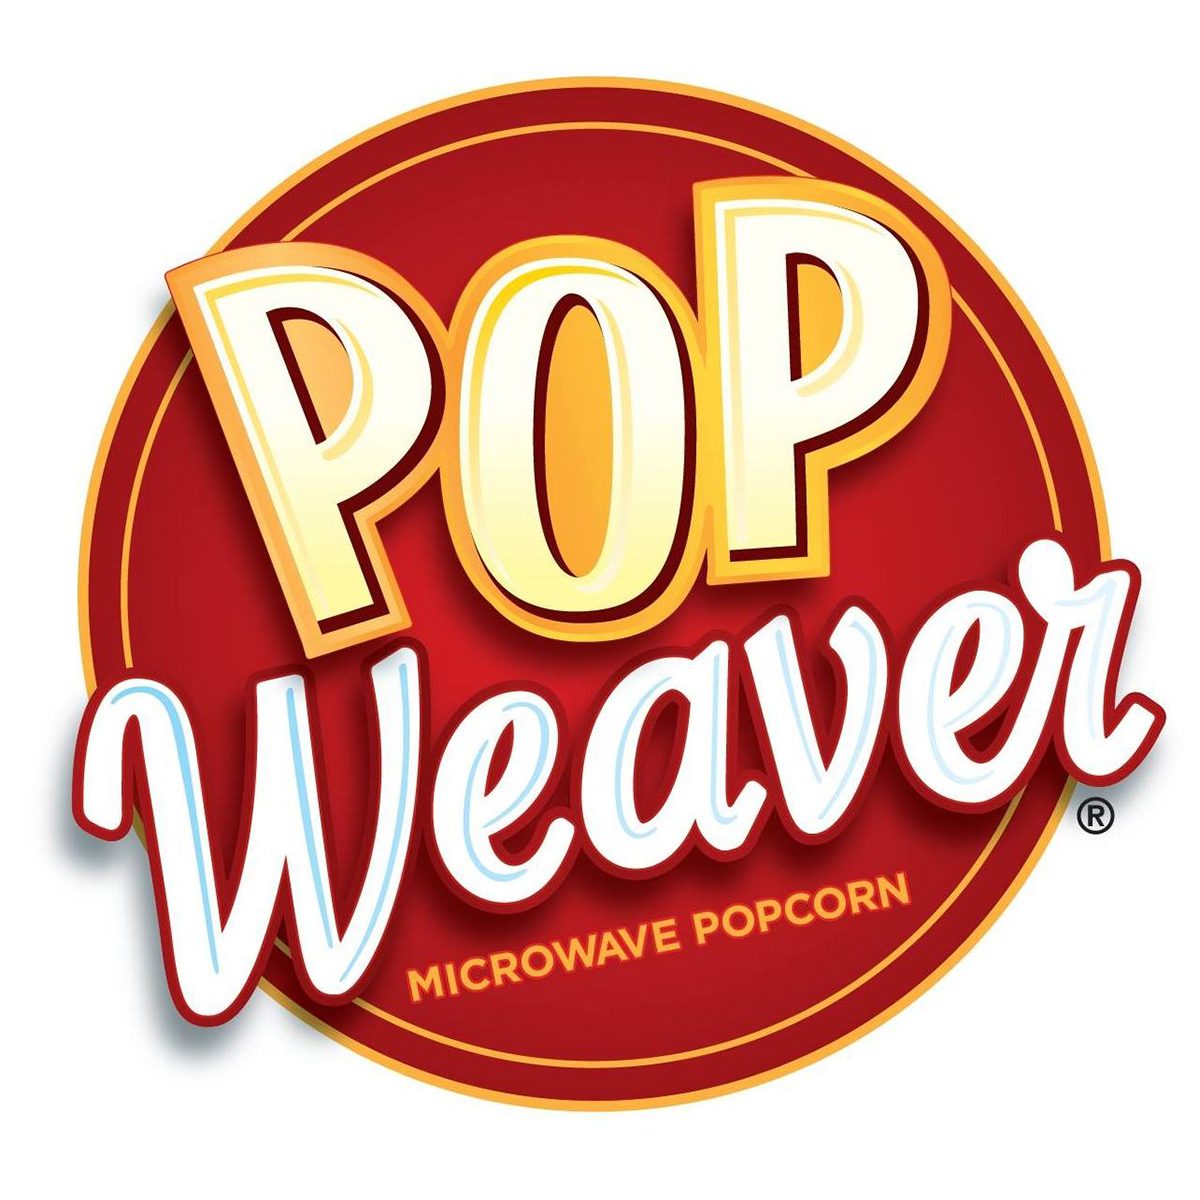 <p><strong><a class="SWhtmlLink" href="http://www.popweaver.com" rel="noopener">Pop Weaver Popcorn</a>, Indianapolis</strong></p> <p>Weaver Popcorn started with door-to-door sales, but this Indiana-based company now produces over 30 percent of the popcorn sold in the world. It's not hand-shucked and bagged anymore, but Weaver still keeps their processes traditional.</p> <p><a class="SWhtmlLink" href="https://www.tasteofhome.com/collection/holiday-popcorn/" rel="noopener">Perk up the popcorn for your next party with these recipes.</a></p>